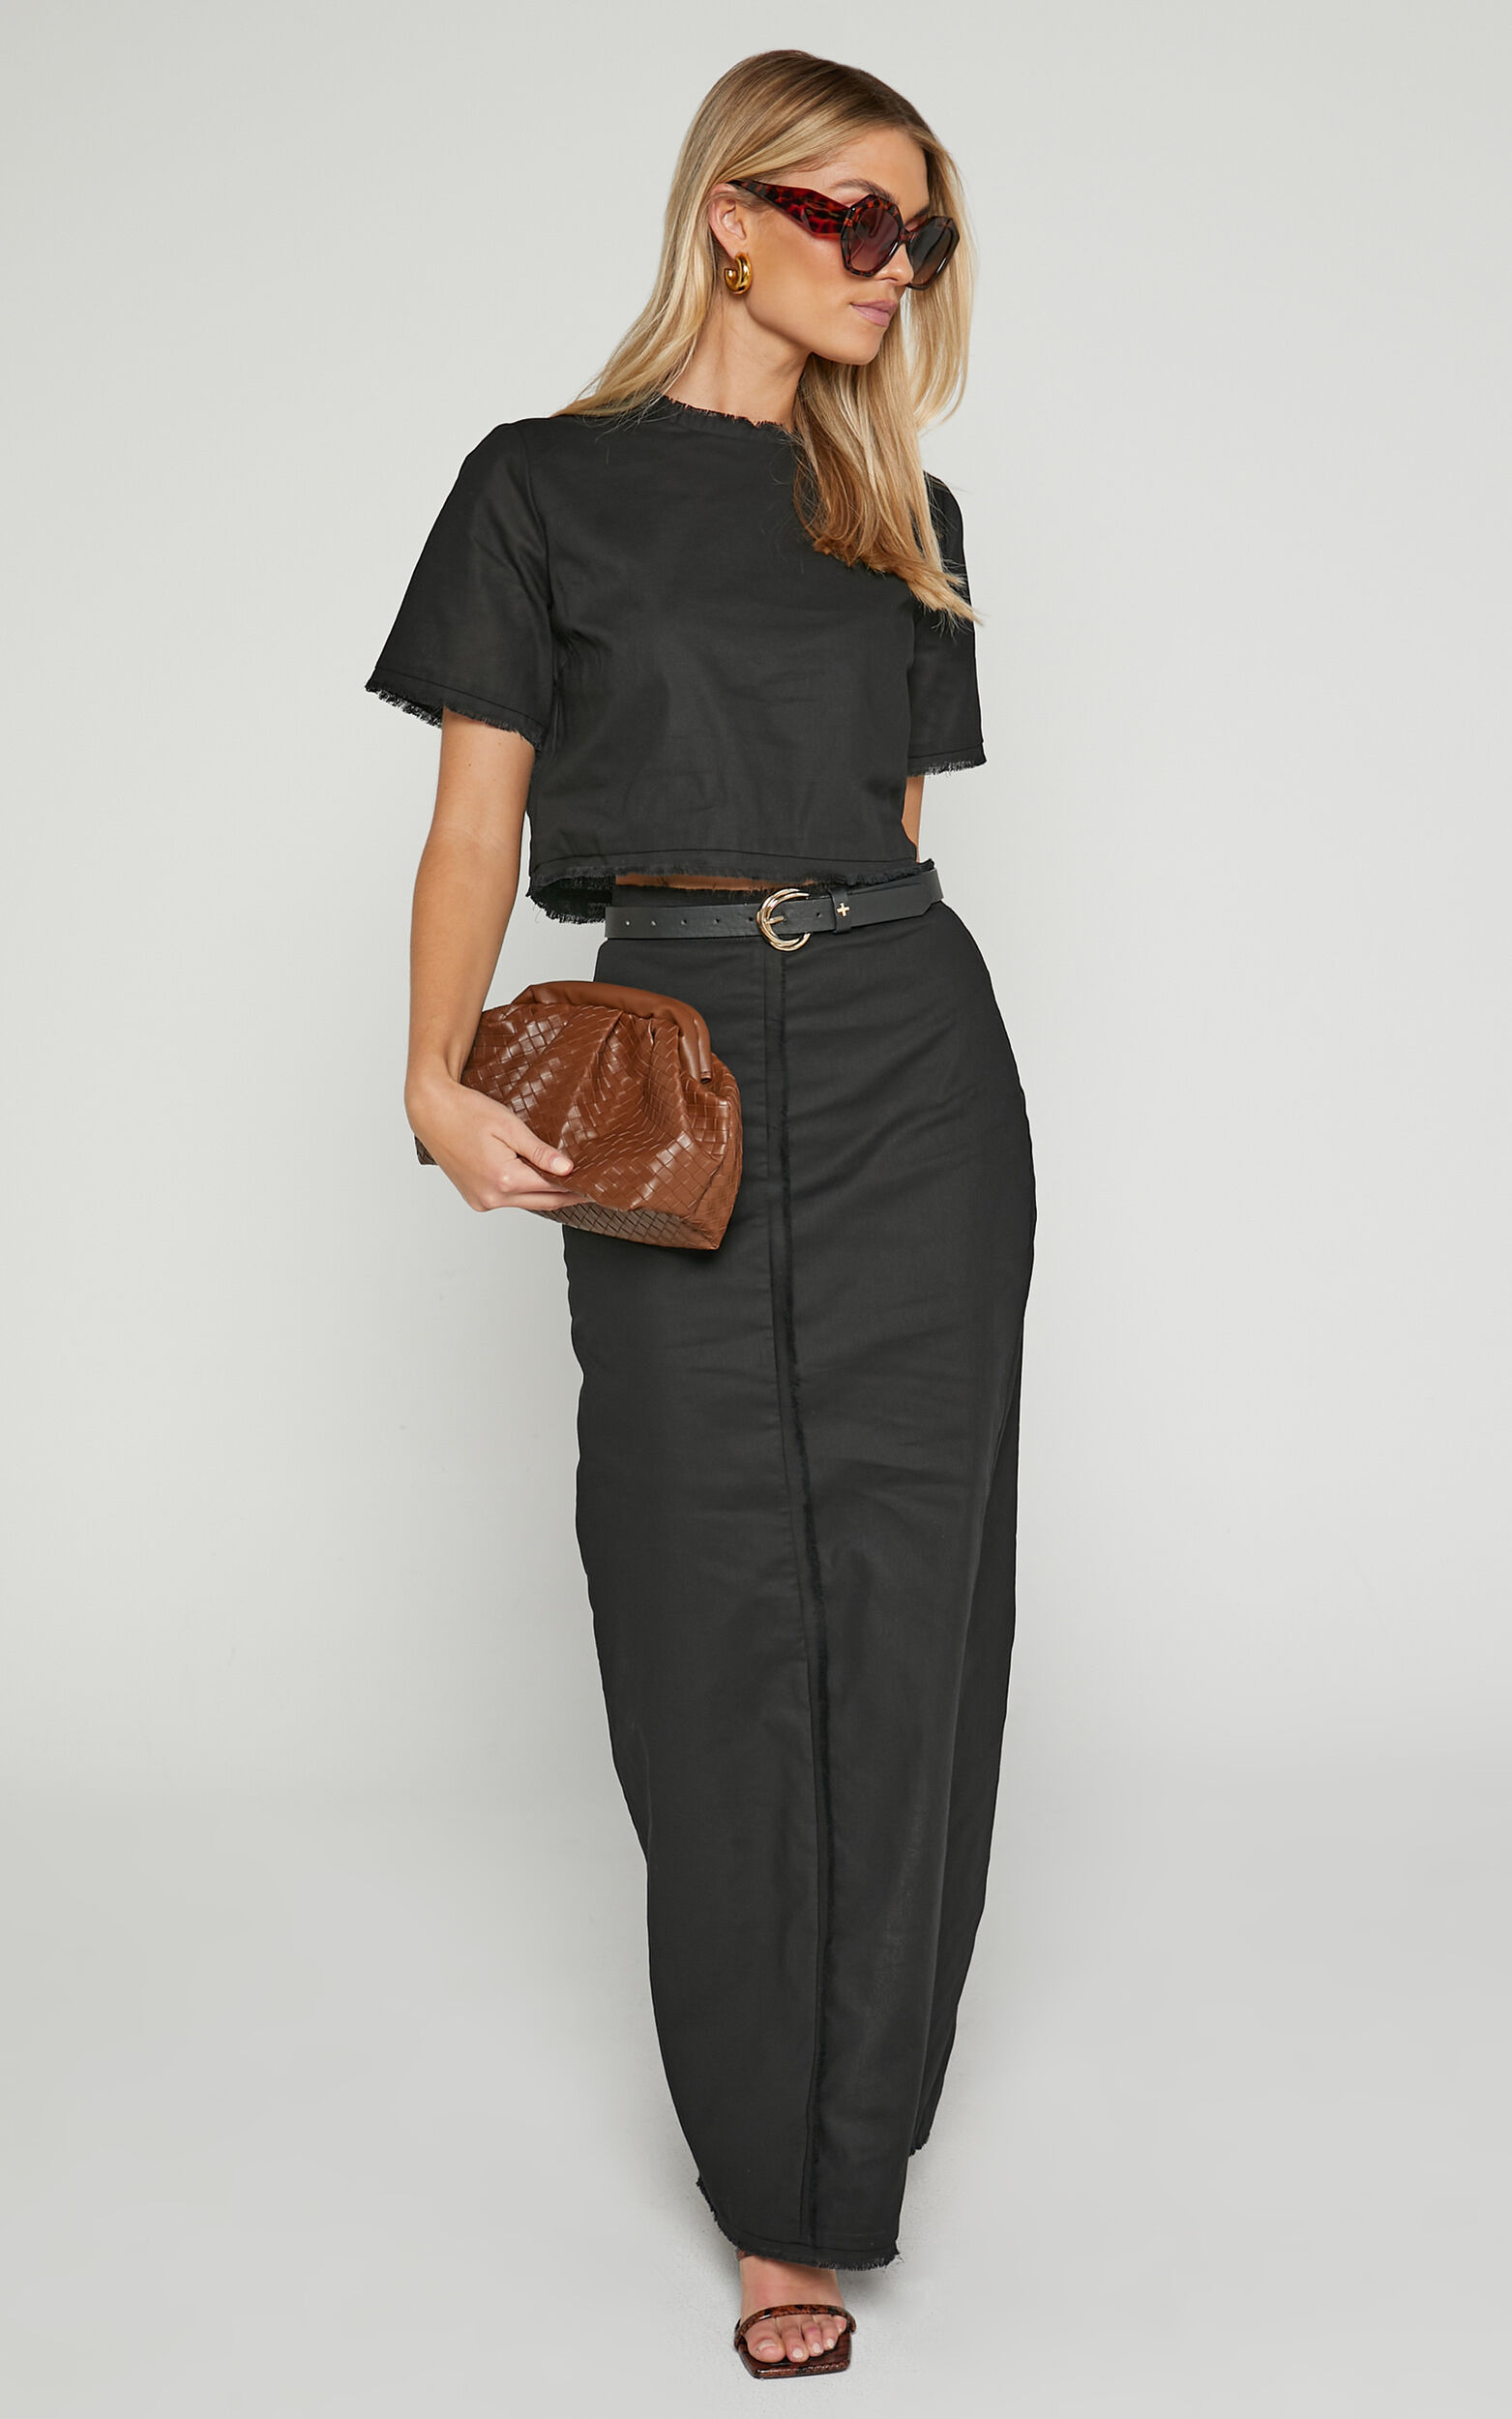 Tisdale Two Piece Set - Linen Look Scoop Neck Short Sleeve Cropped Top and Maxi Skirt in Black - 06, BLK1